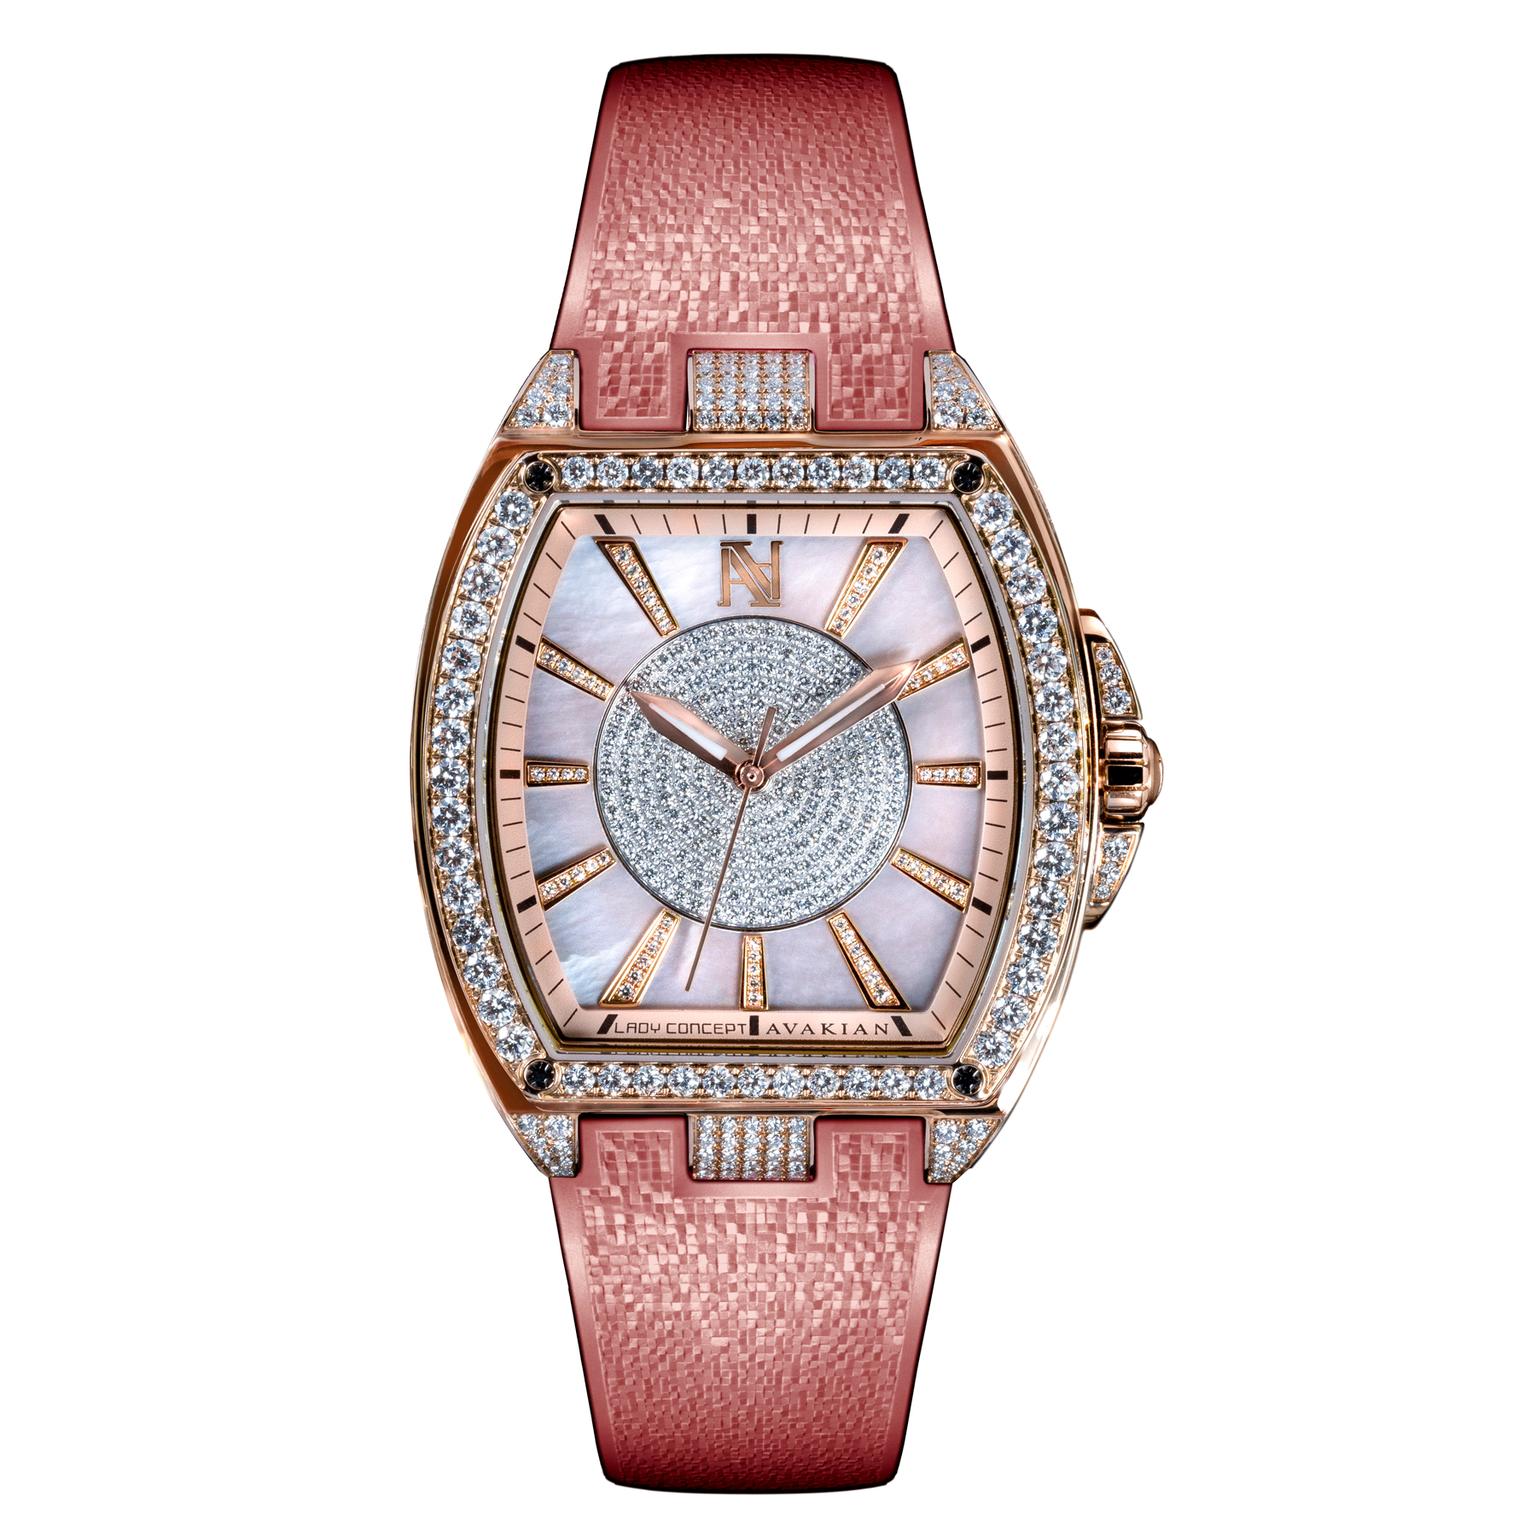 Avakian Lady Concept Pink watch